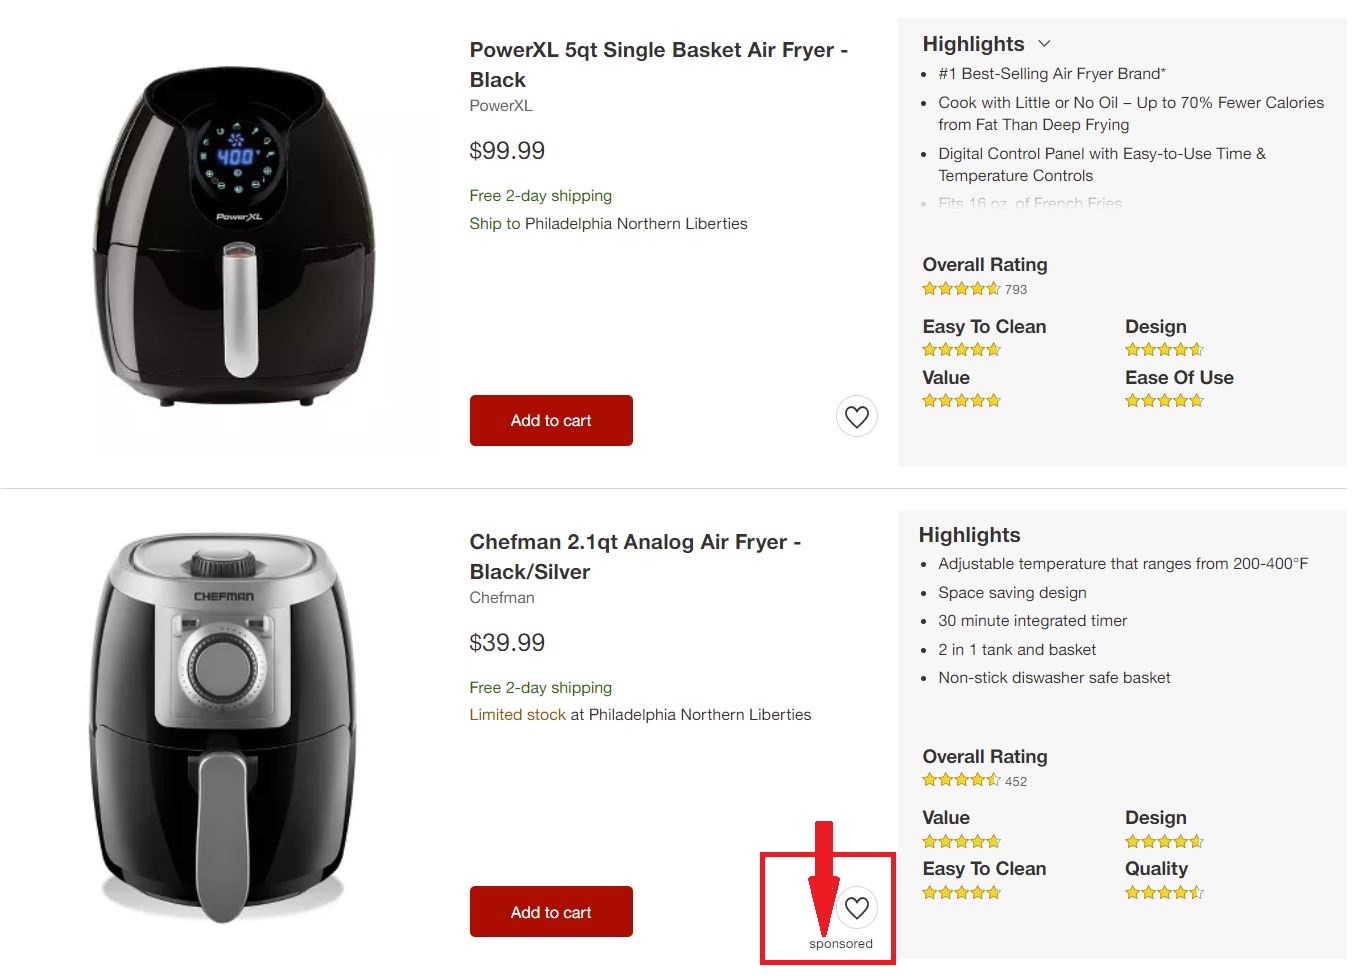 Search results for air fryers on the Target website